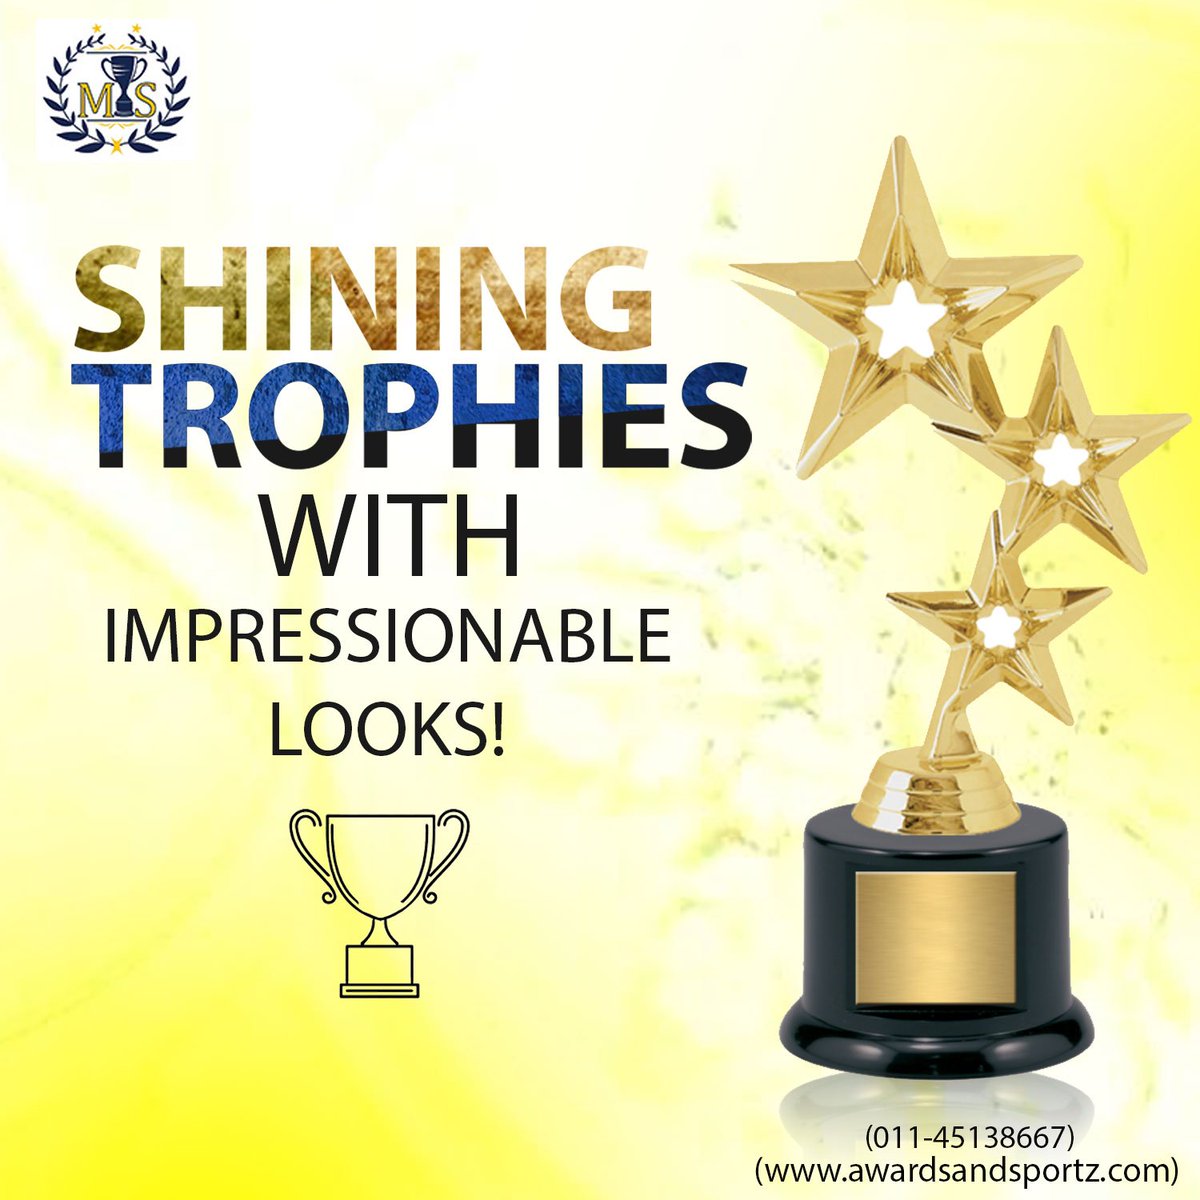 Shining #Trophies with Impressionable Looks!

Order now: awardsandsportz.com

#Trophies2019 #Schooltrophies #TrophiesOnline #Onlinetrophies #Metaltrophies